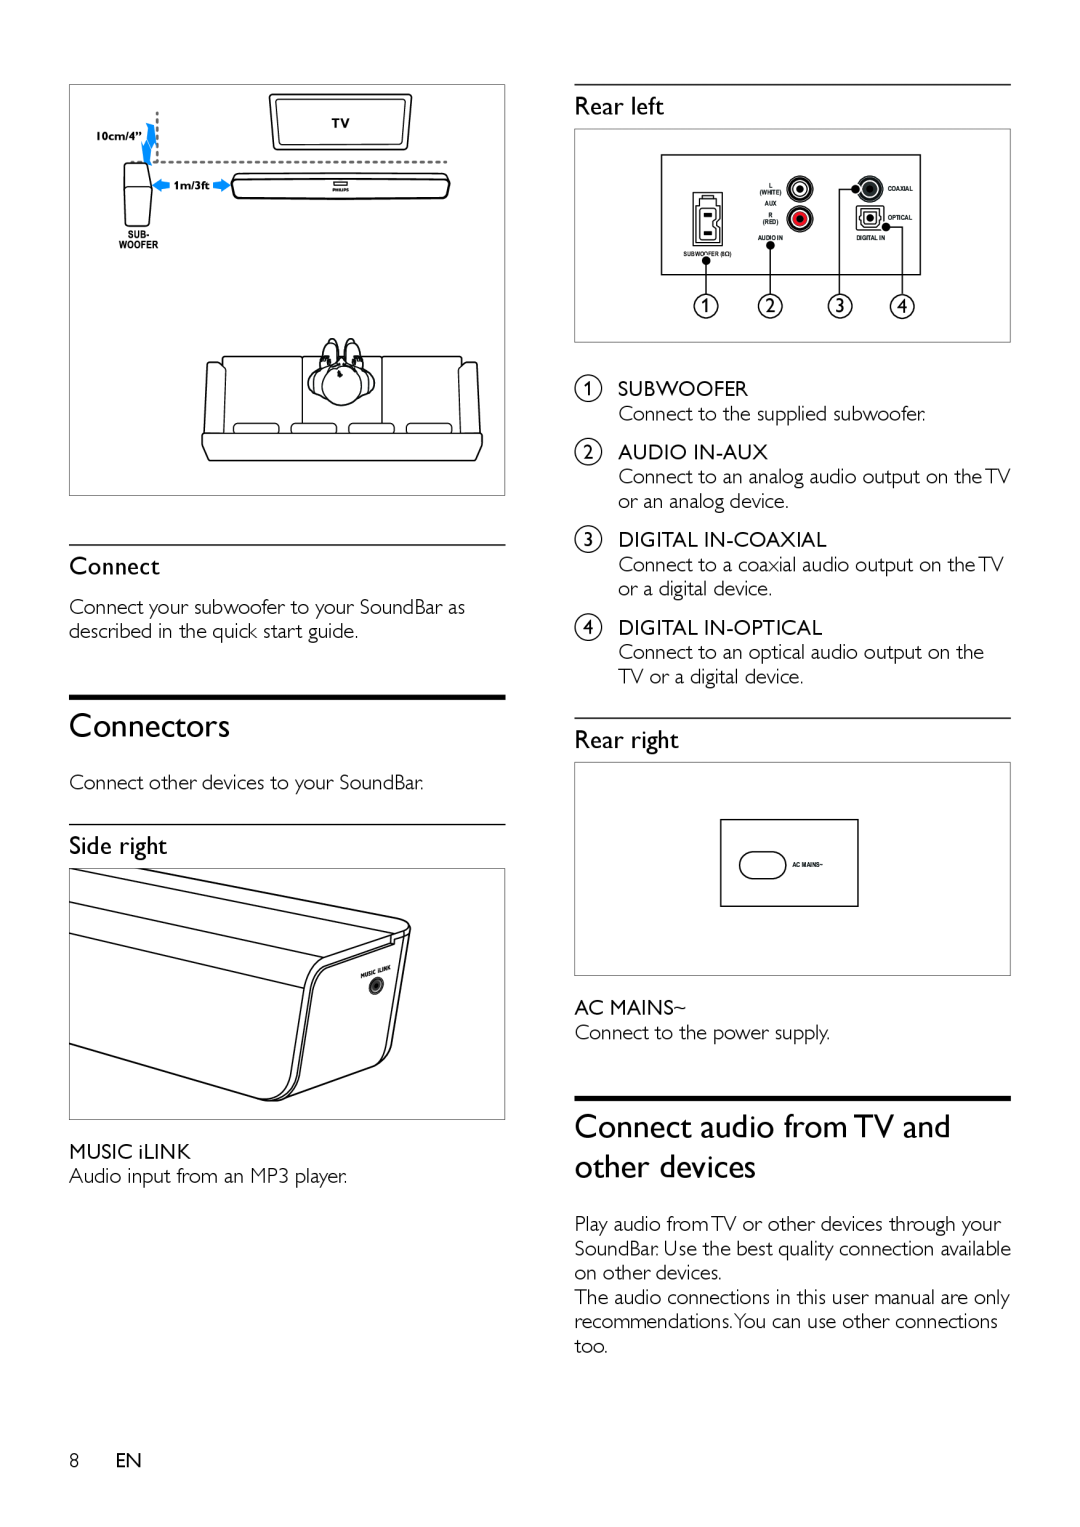 Philips CSS2123/F7 user manual Connectors, Connect audio from TV and other devices, Side right, Rear left, Rear right 